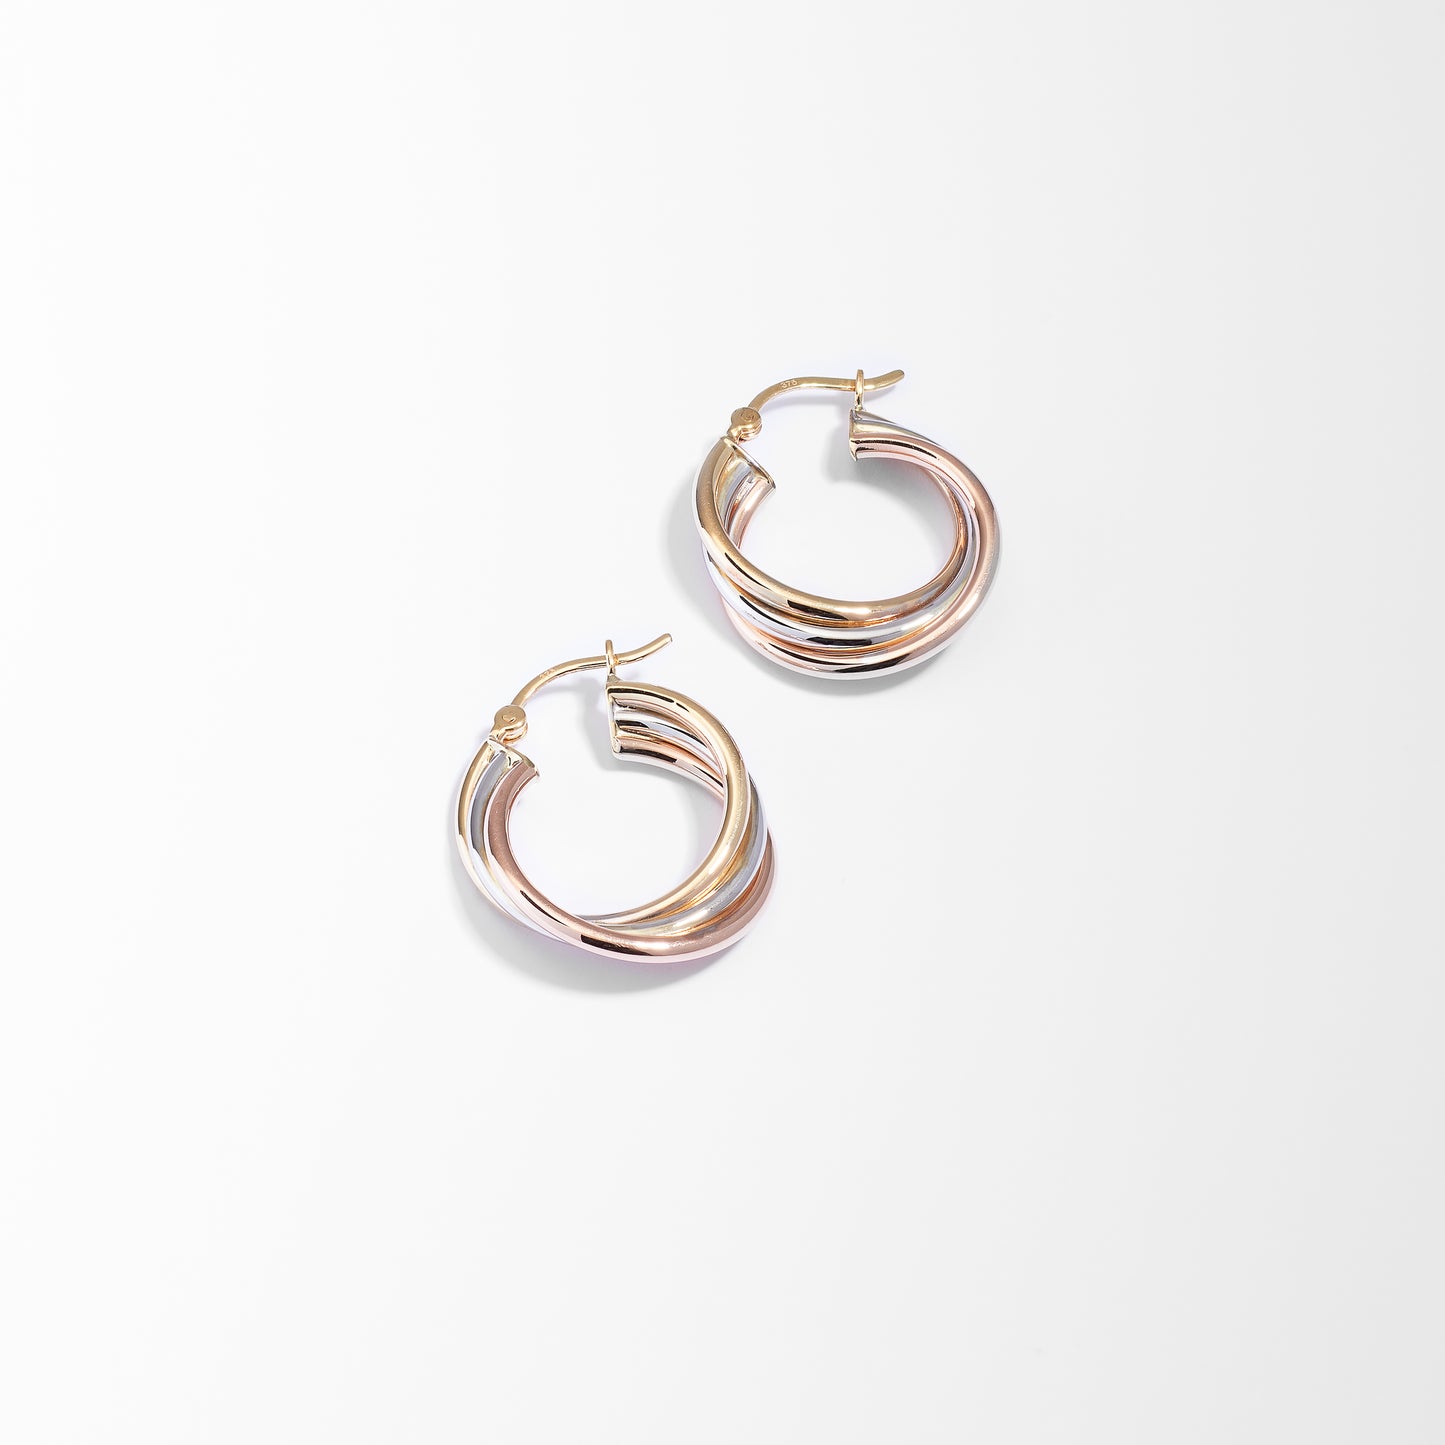 9K Yellow, White And Rose Gold Trio Twist Hoop Earrings 20mm